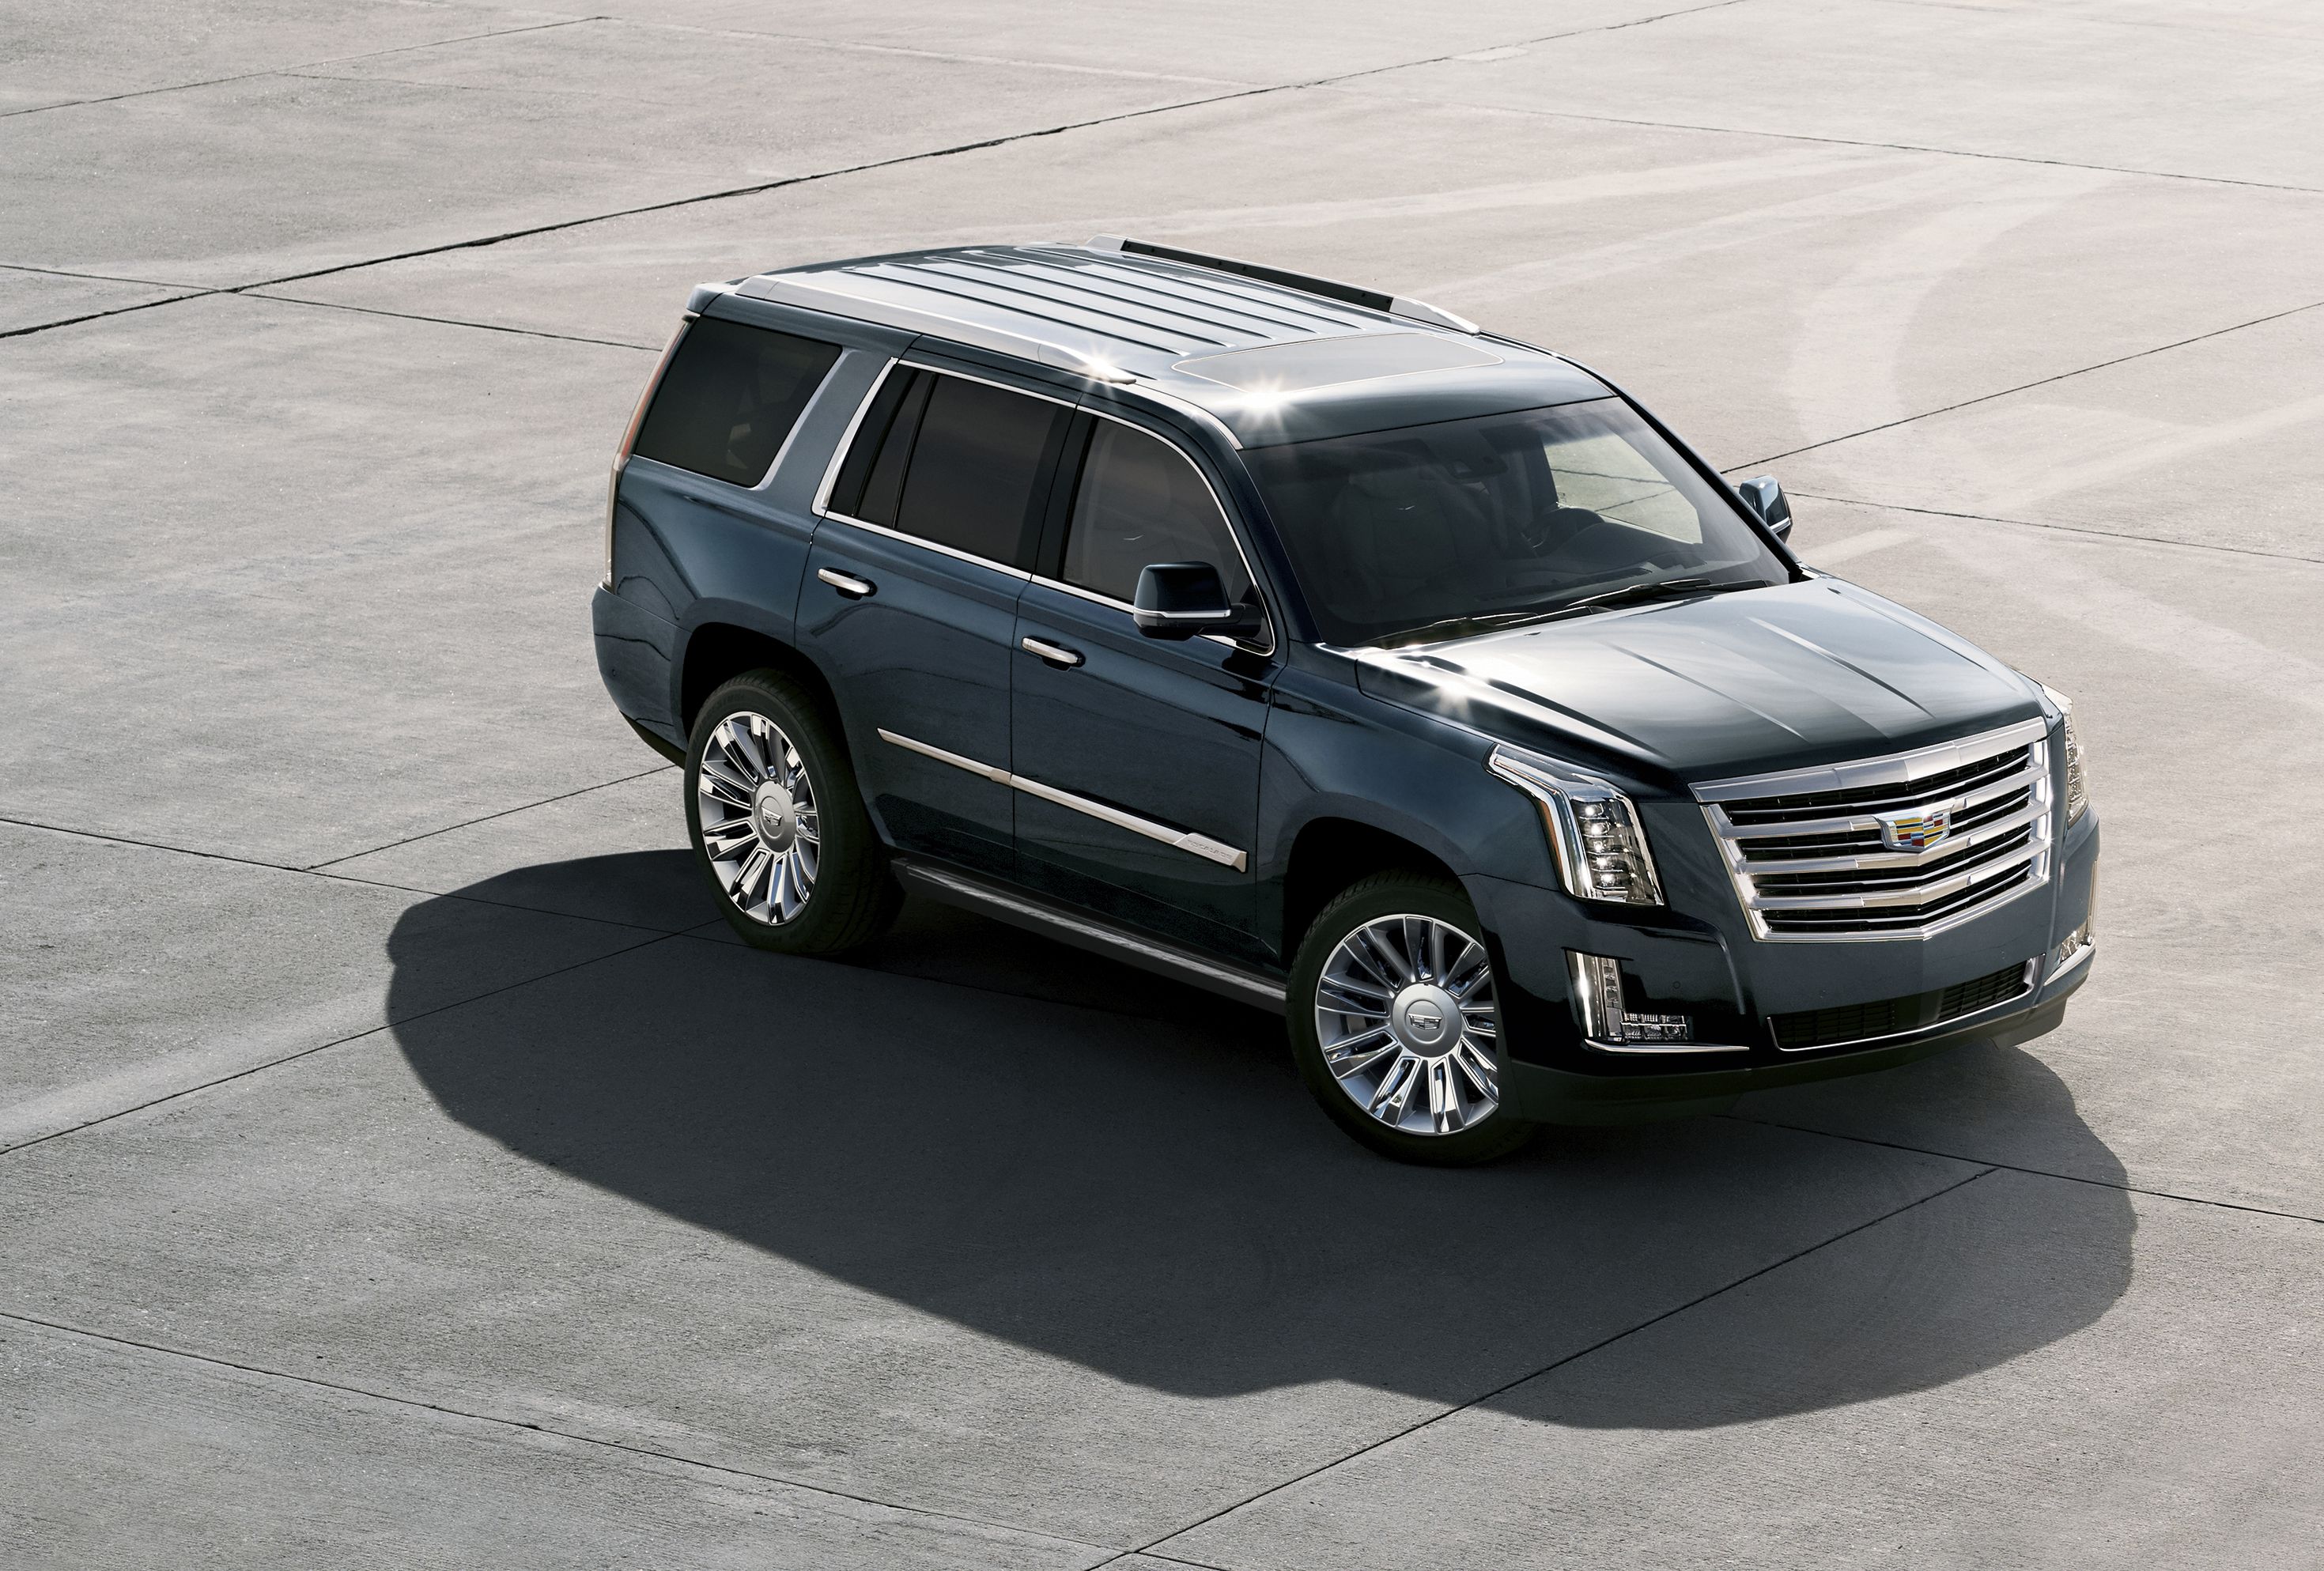 2020 Cadillac Escalade Review, Pricing, and Specs